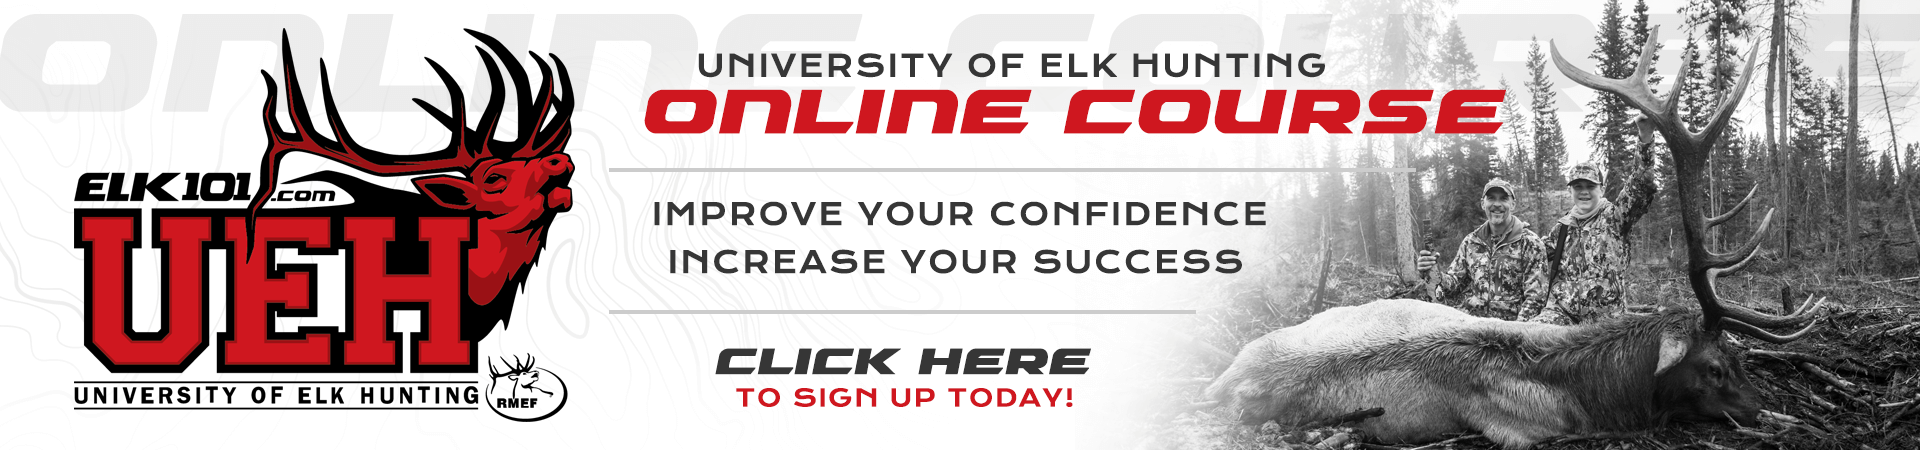 University-of-Elk-Hunting-Online-Course-Ad-hover